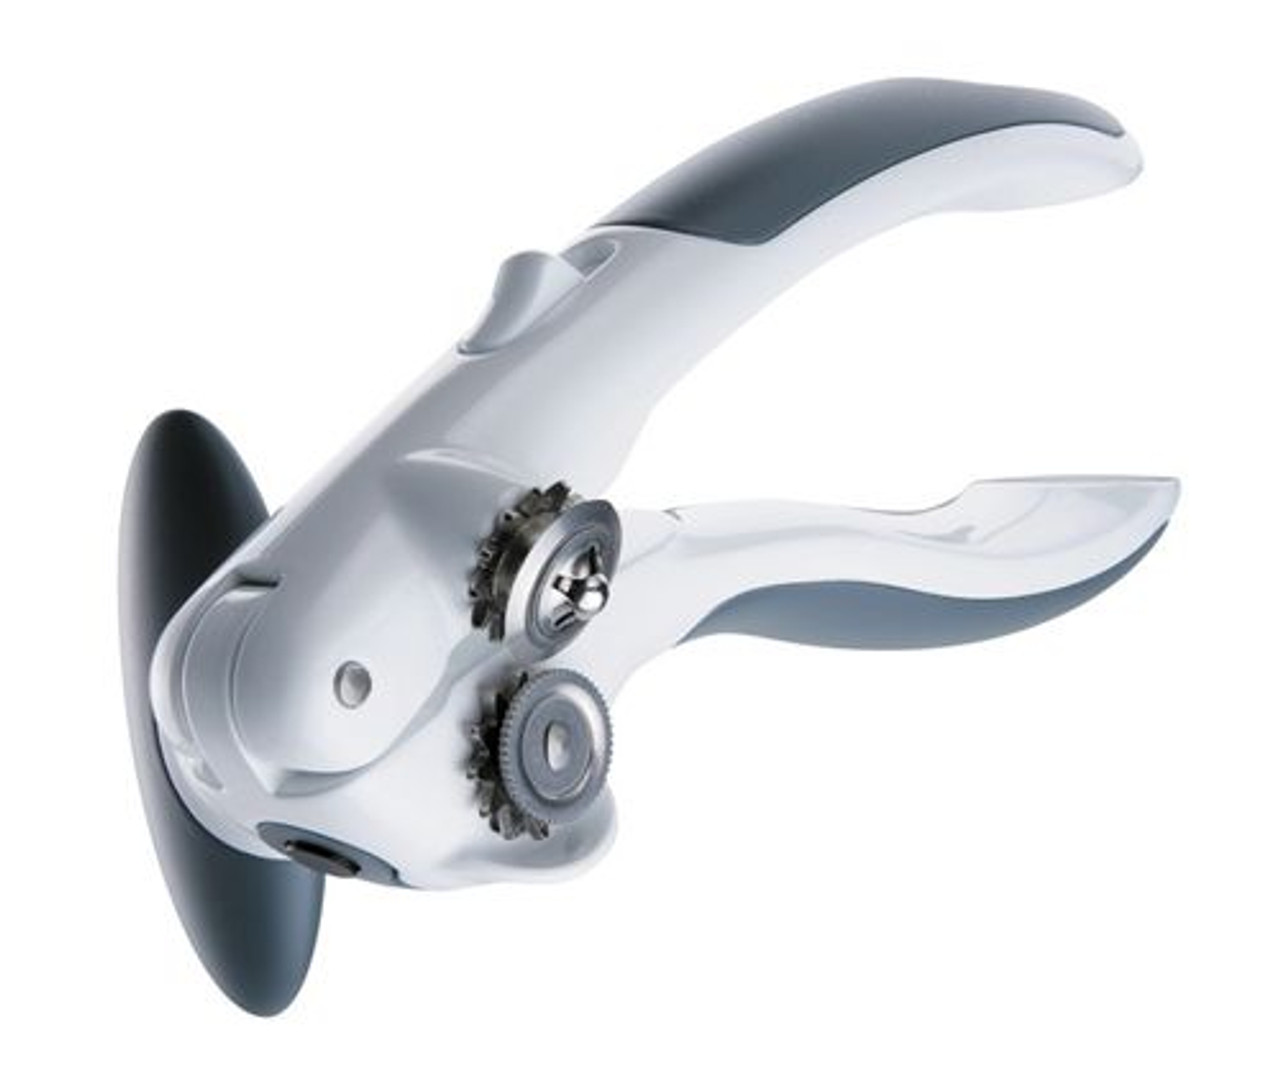 Zyliss 20362 Locking Can Opener